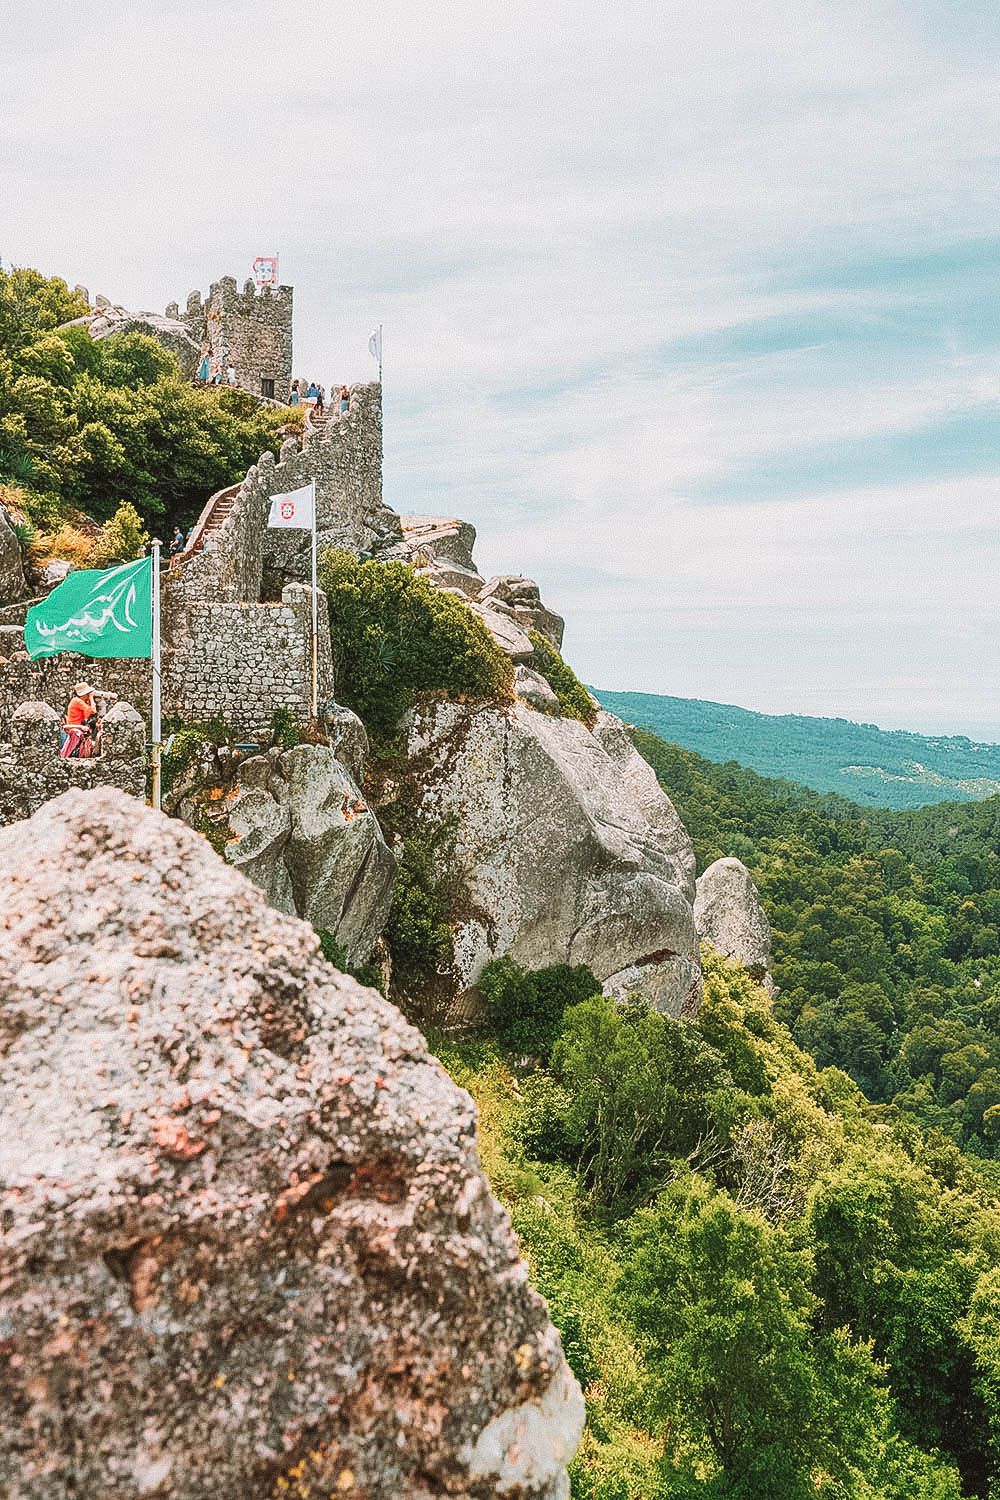 Moorish Castle - Ultimate Guide to Visiting Sintra Portugal in a day trip from Lisbon Portugal  #Sintra #Lisbon #Portugal #Europe